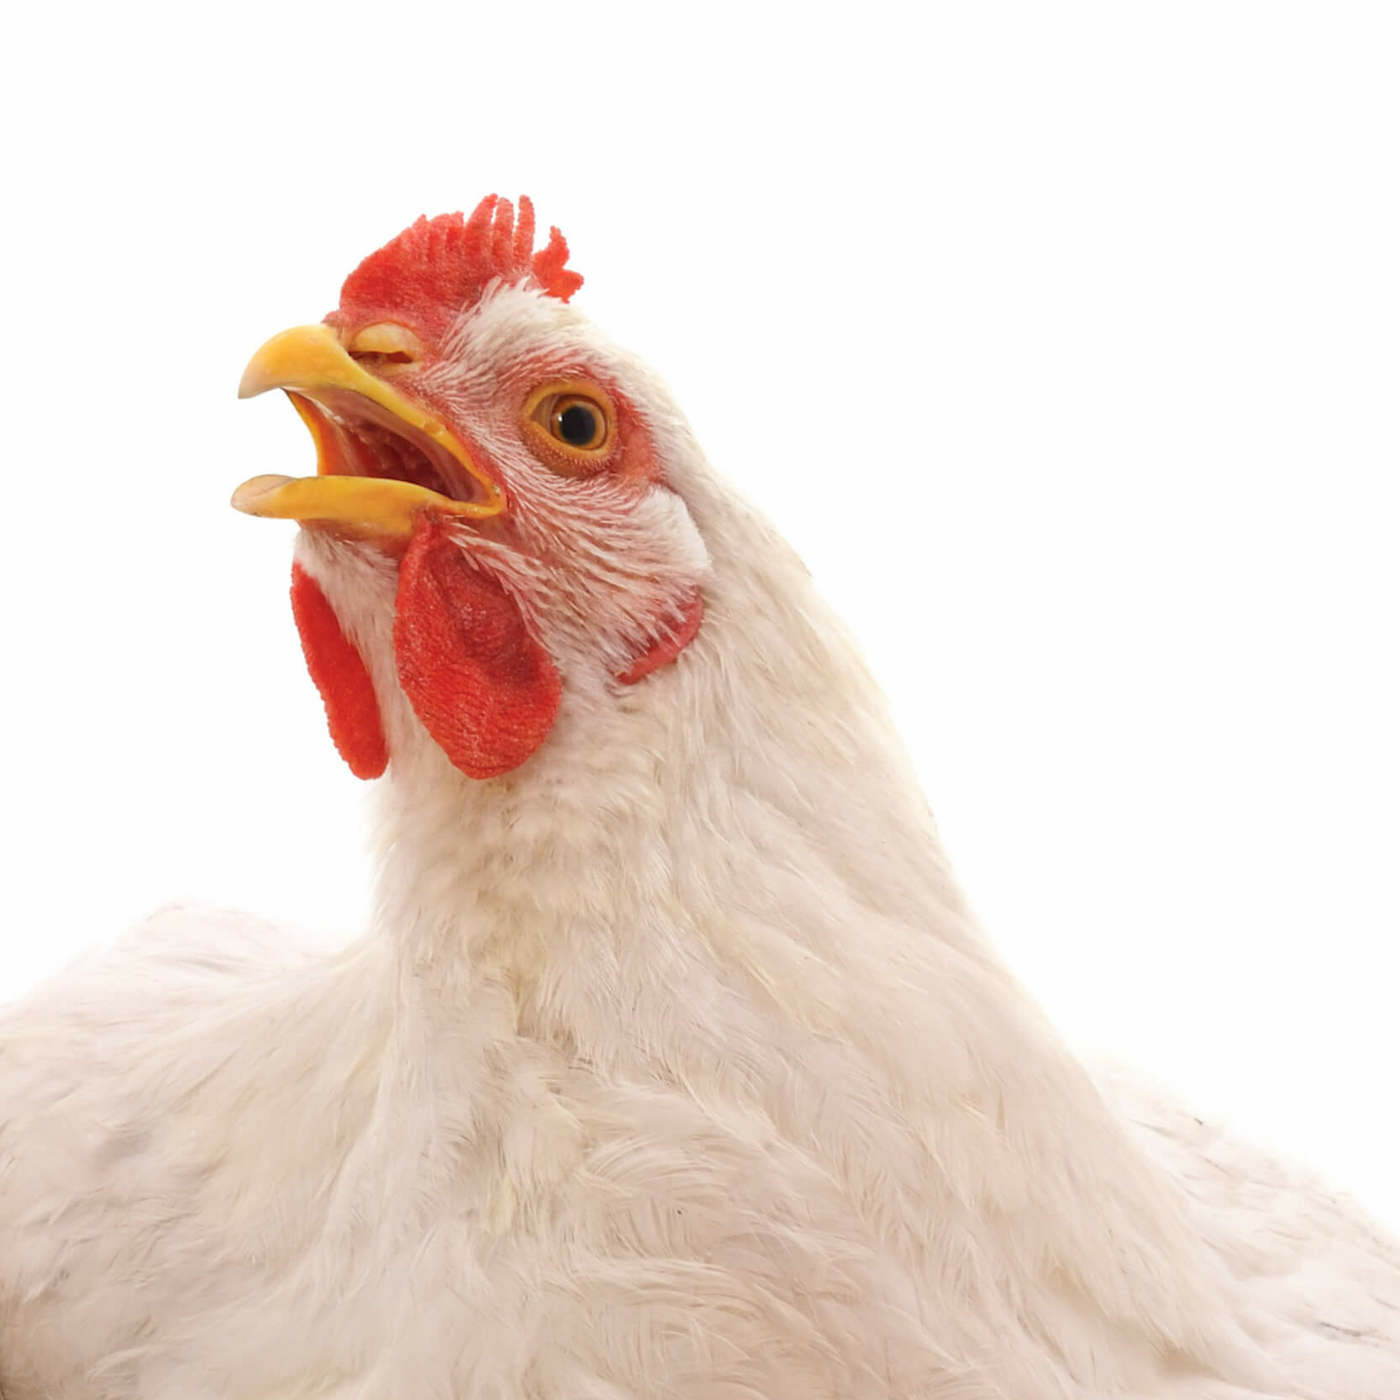 Subway Commits to Improve Chicken Welfare